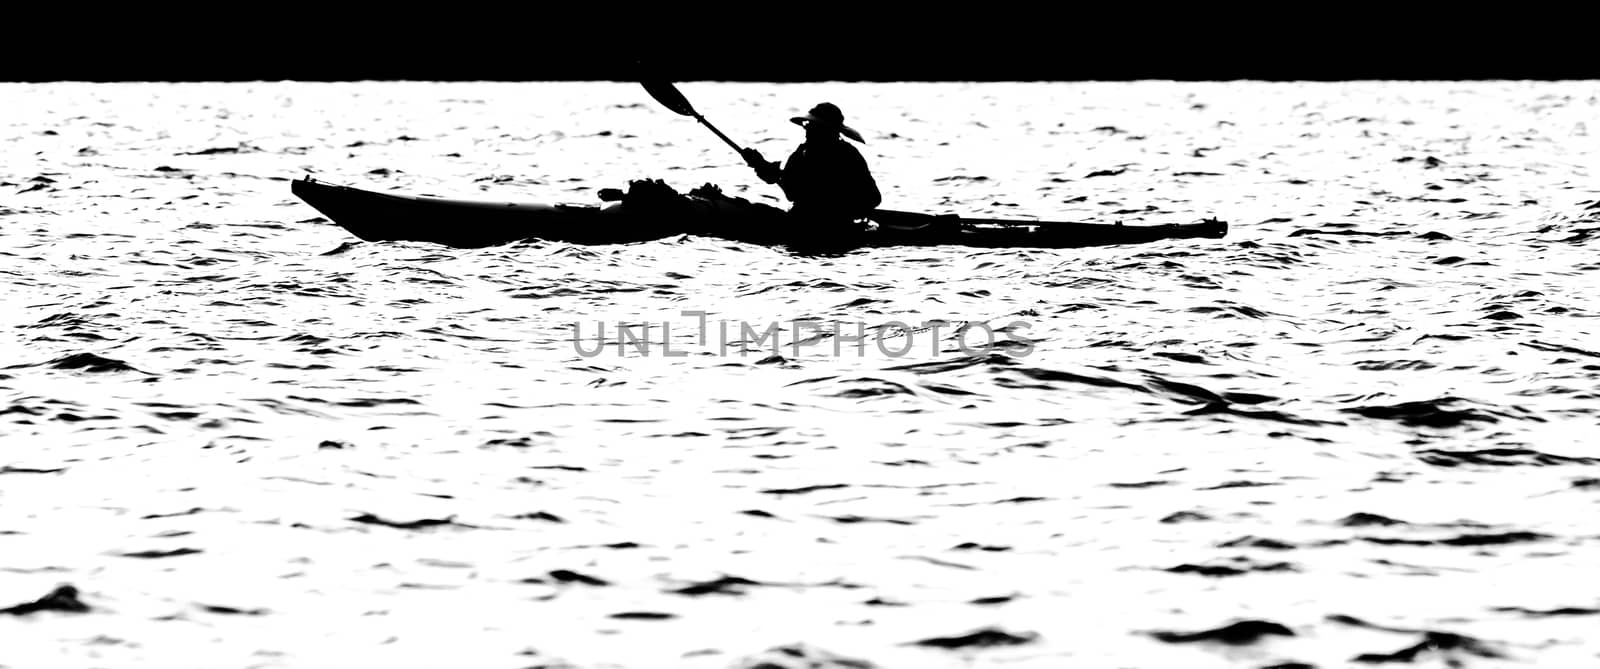 Sillouette of man kayaking on lake by digidreamgrafix